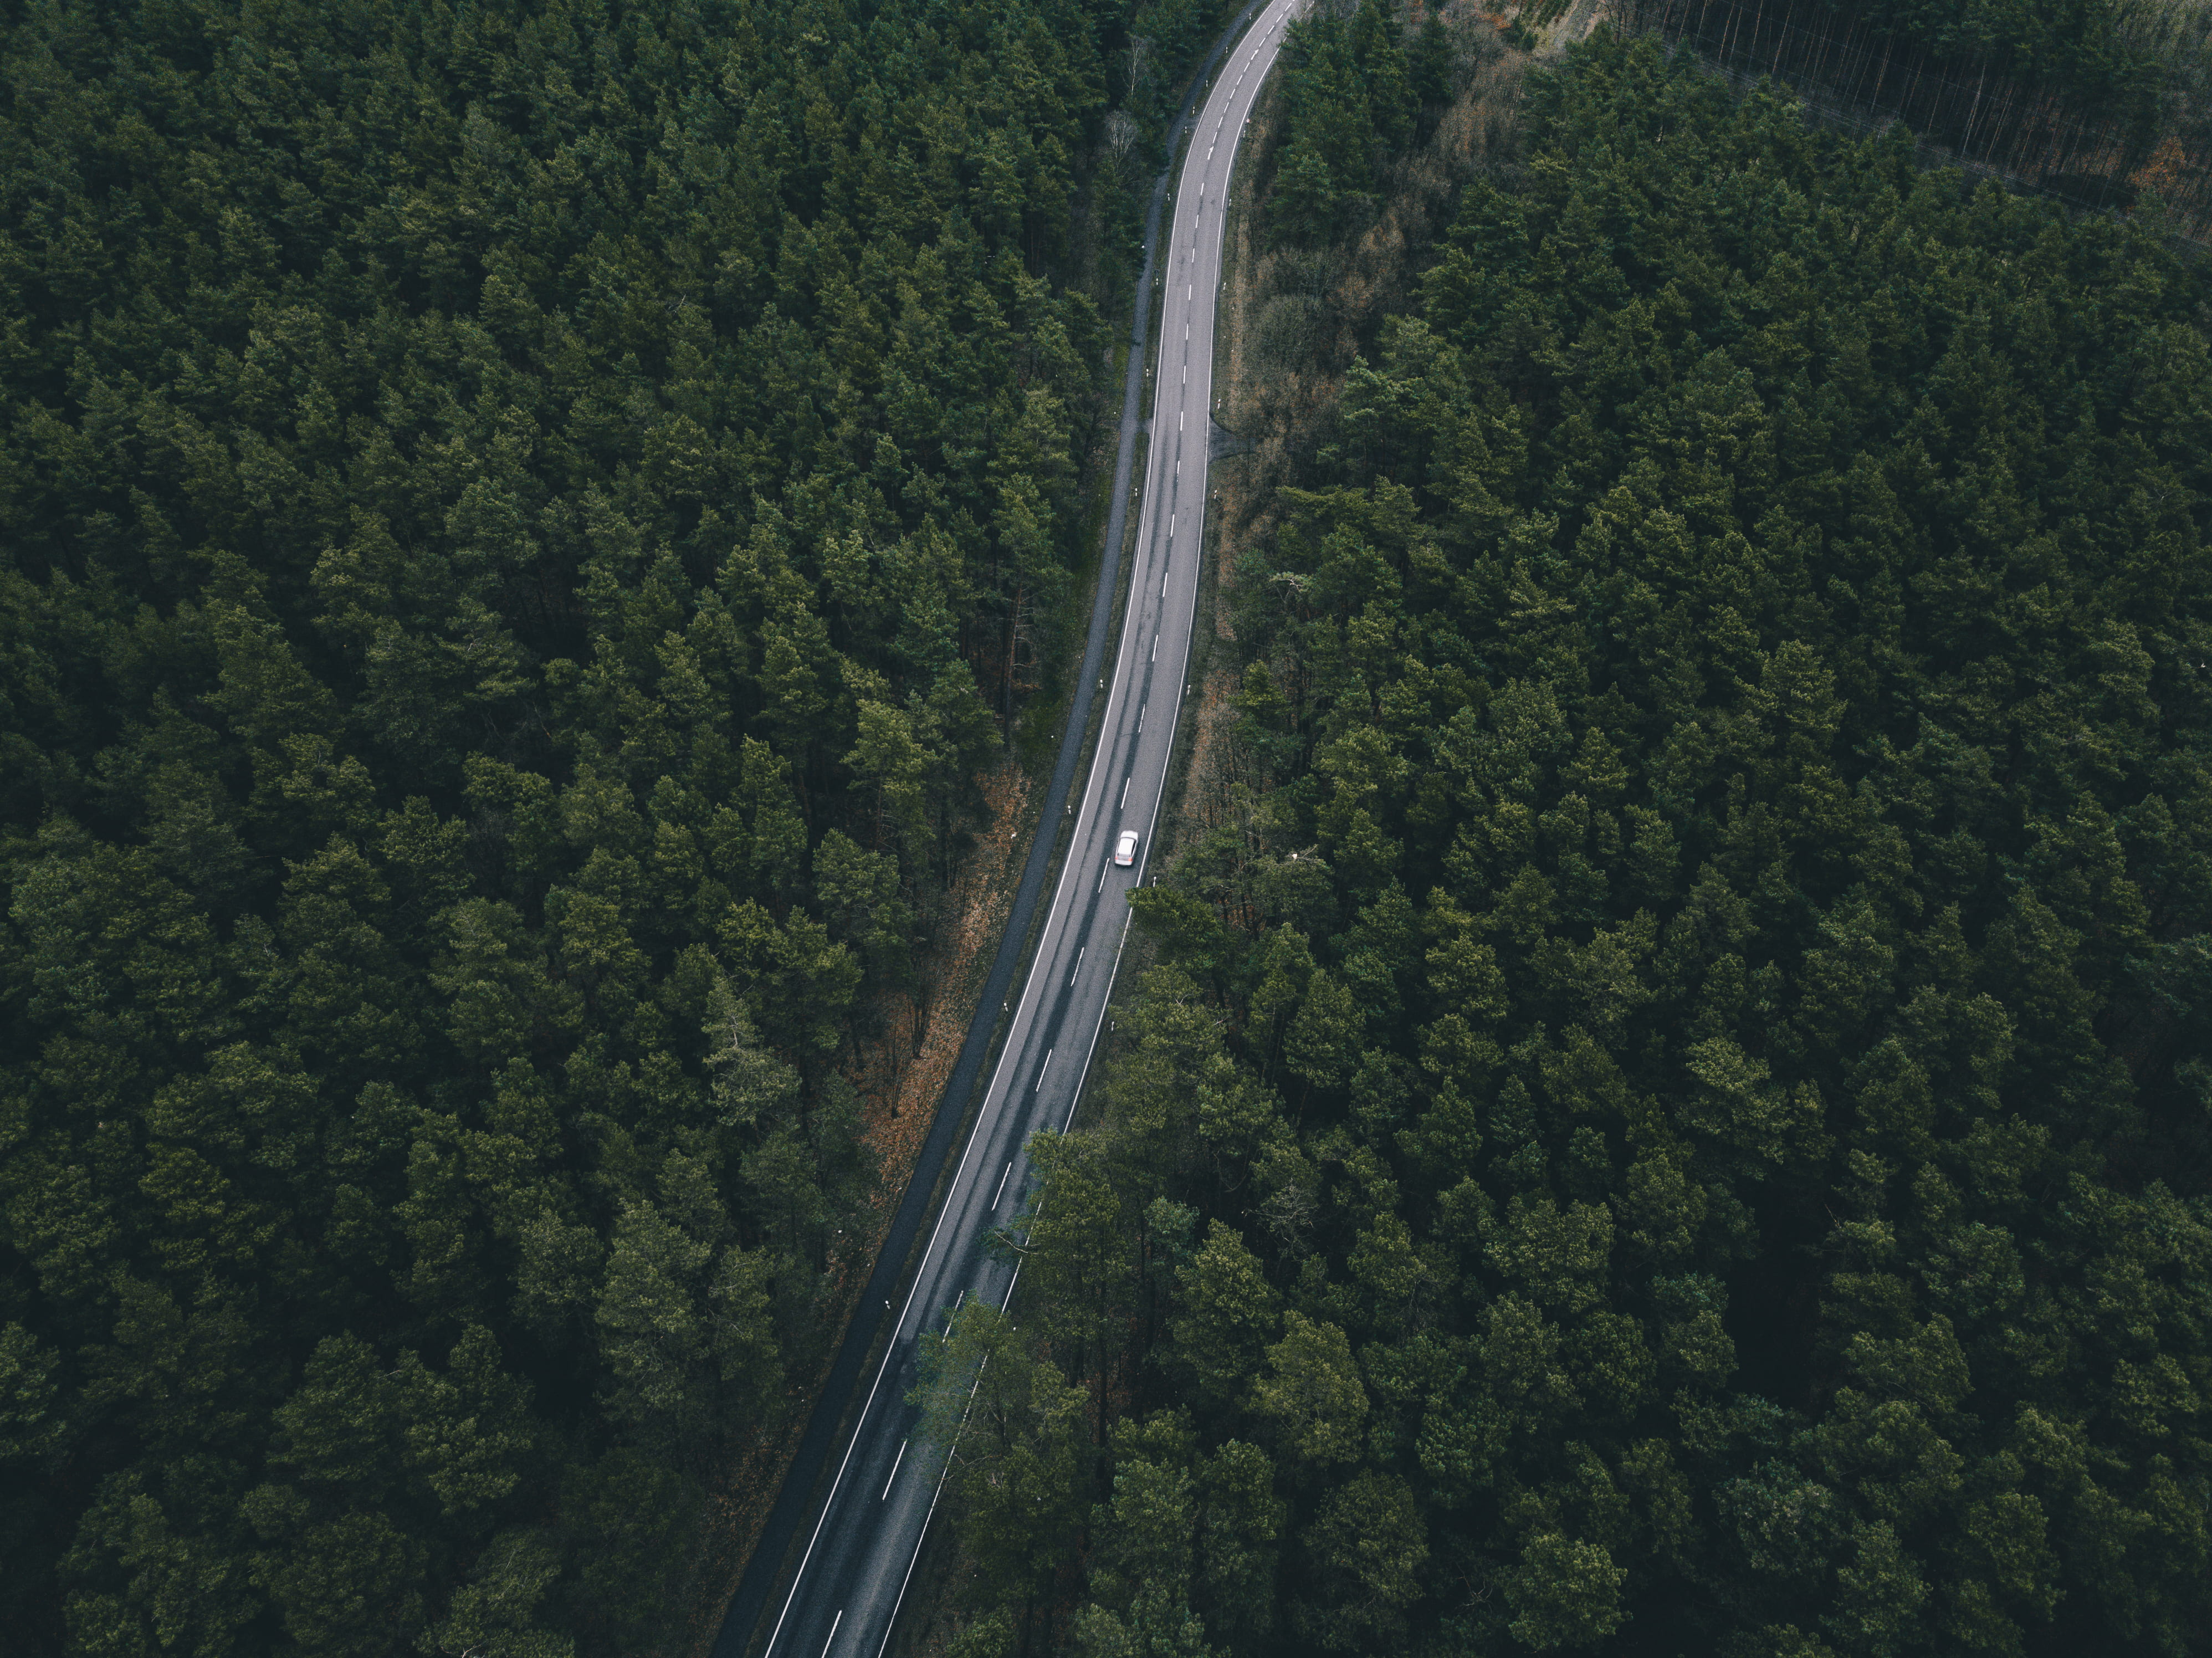 birds eye photography of white vehicle on road, aerial view of road surrounded by trees